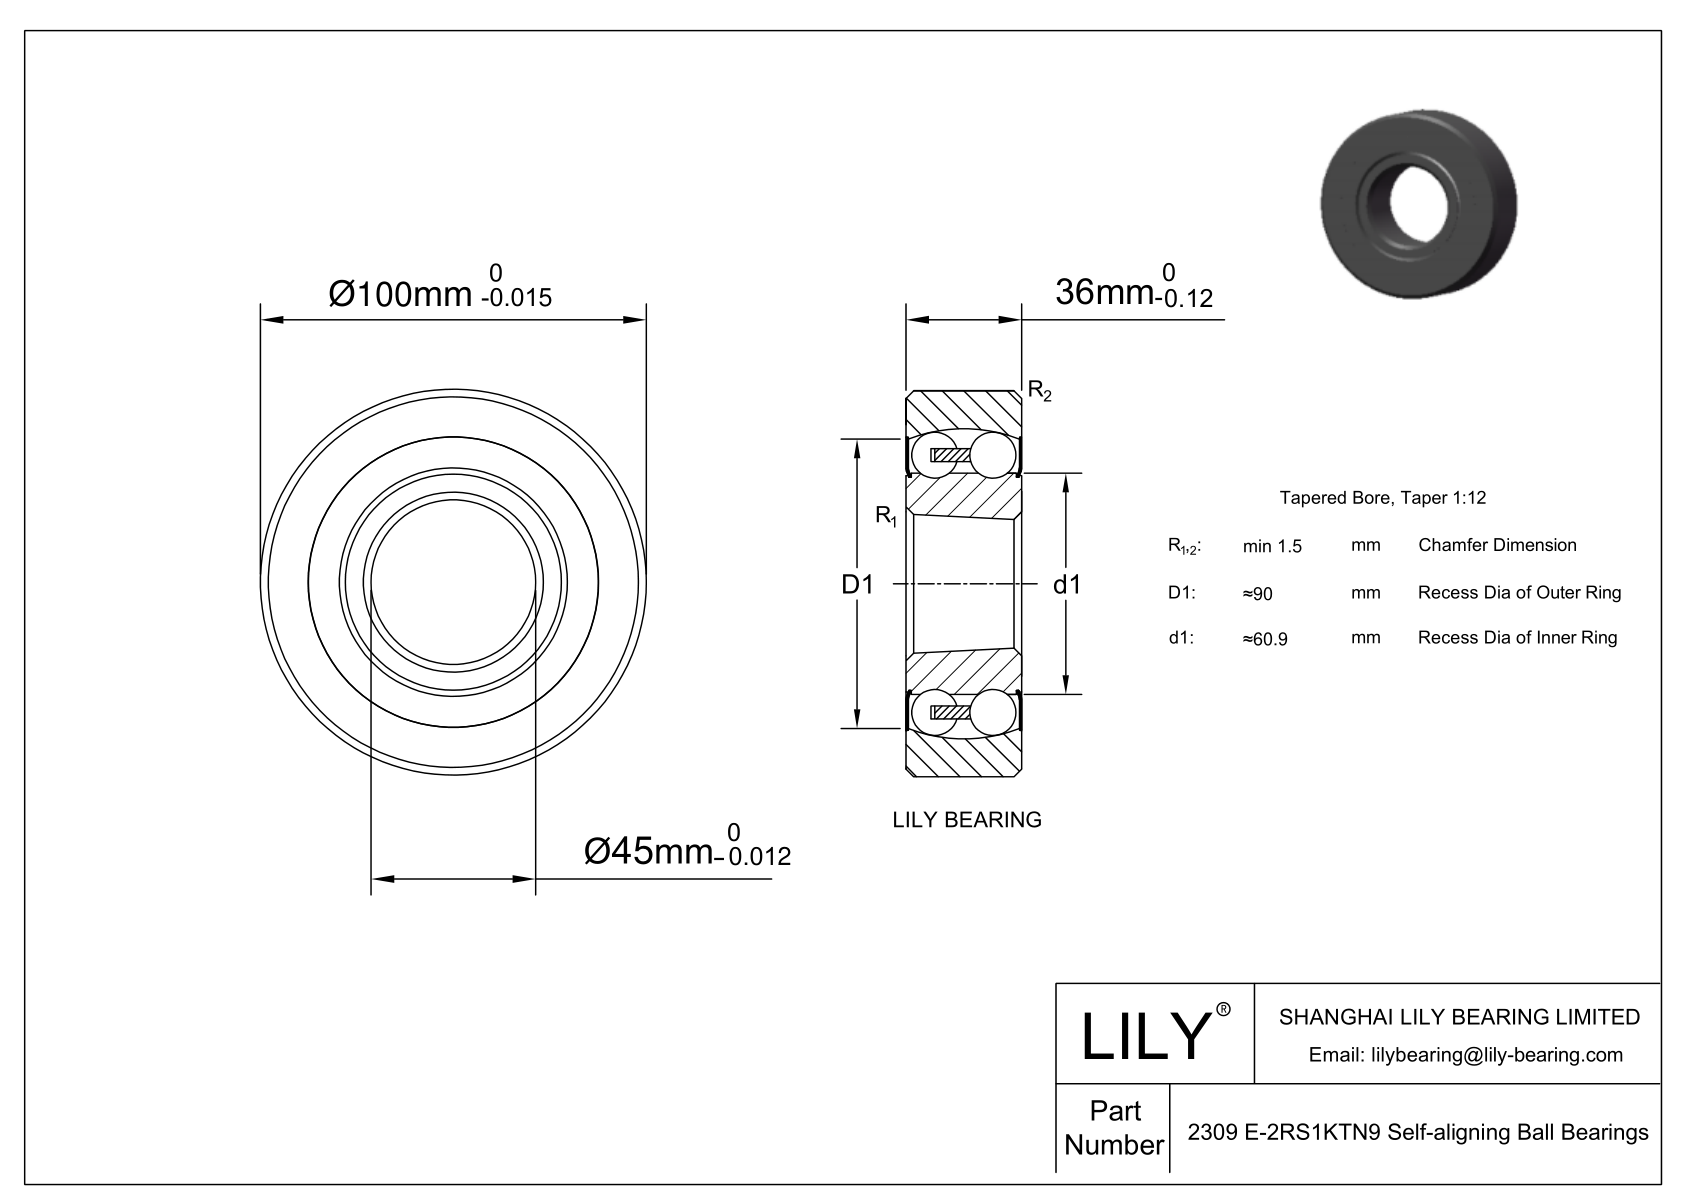 S2309 E-2RS1KTN9 Stainless Steel Self Aligning Ball Bearings cad drawing